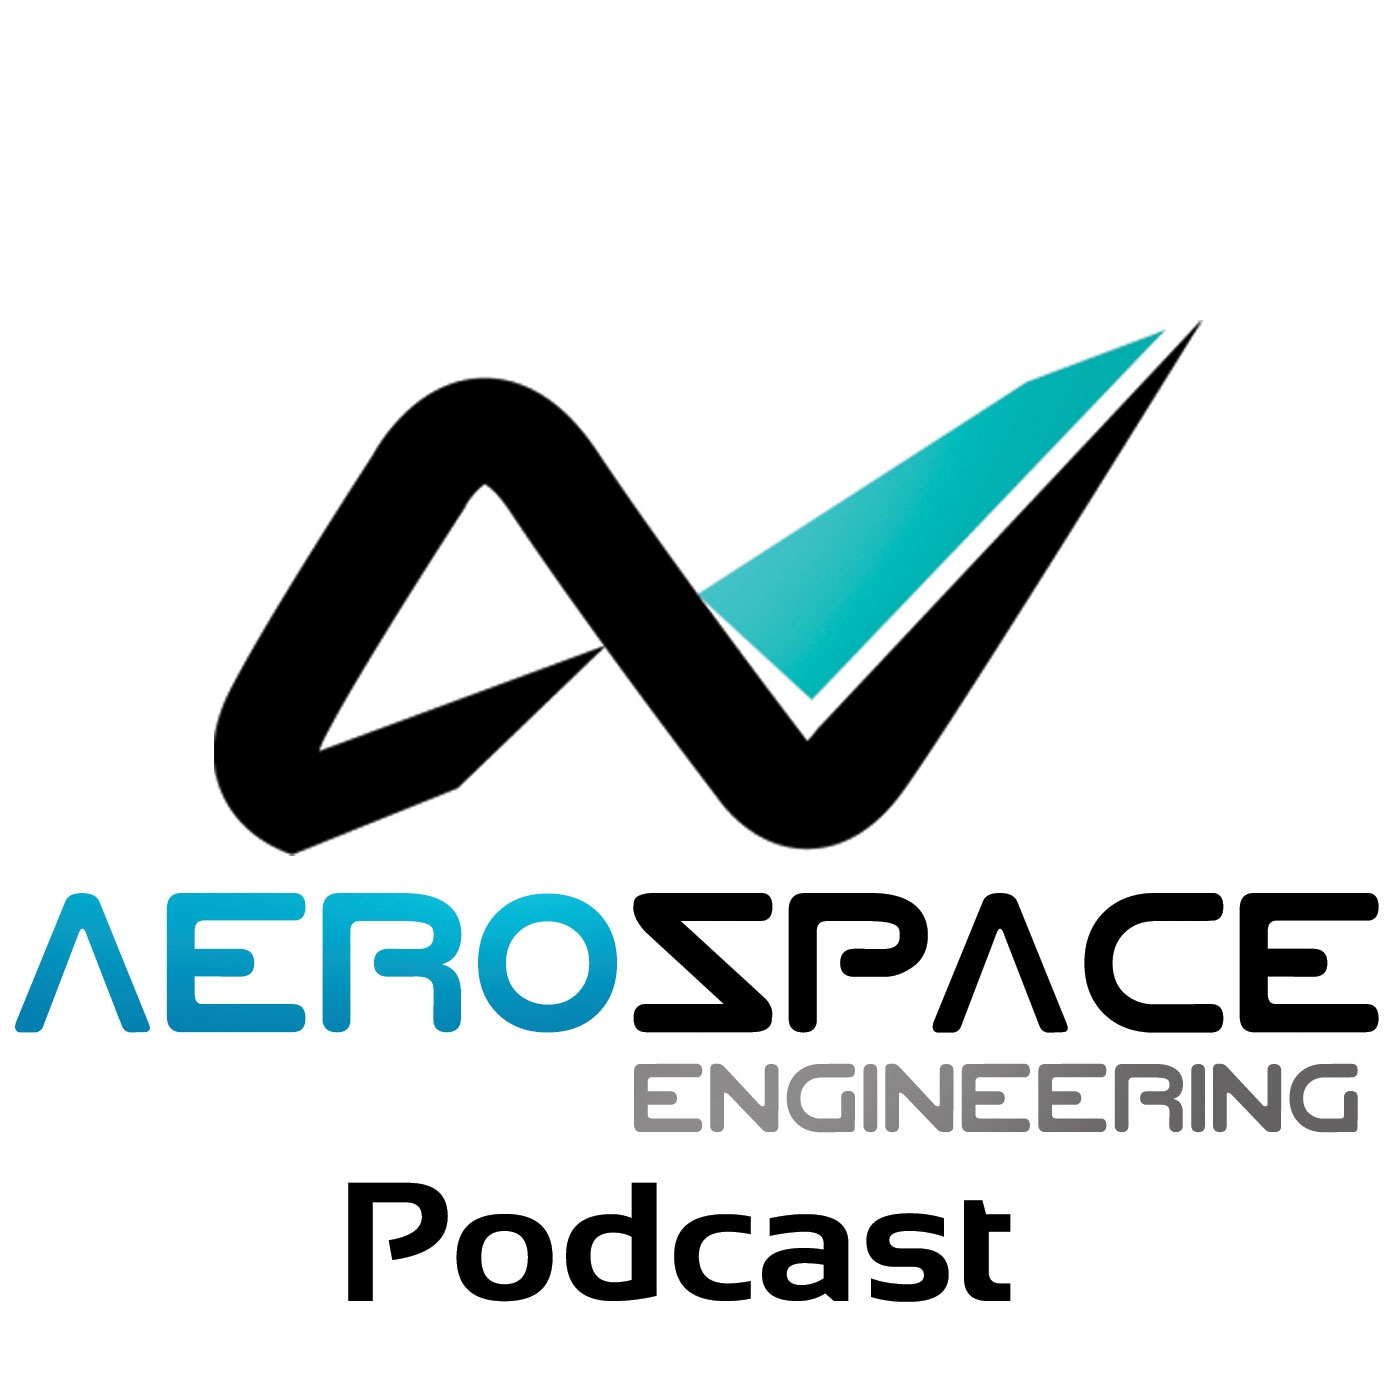 Podcast Ep. #49 – 9T Labs is Producing High-Performance Composite Materials Through 3D Printing